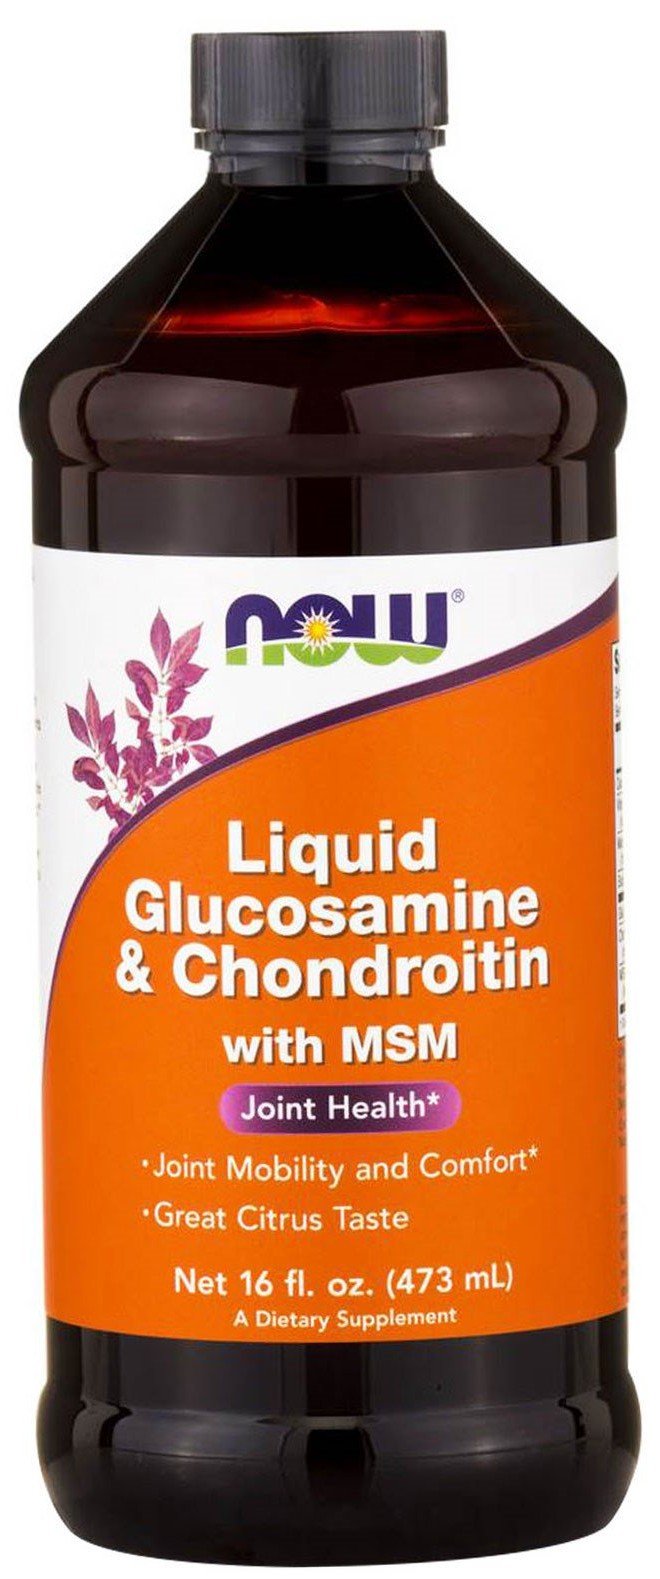 Liquid Glucosamine & Chondroitin with MSM, 473 ml, Now. Para articulaciones y ligamentos. General Health Ligament and Joint strengthening 